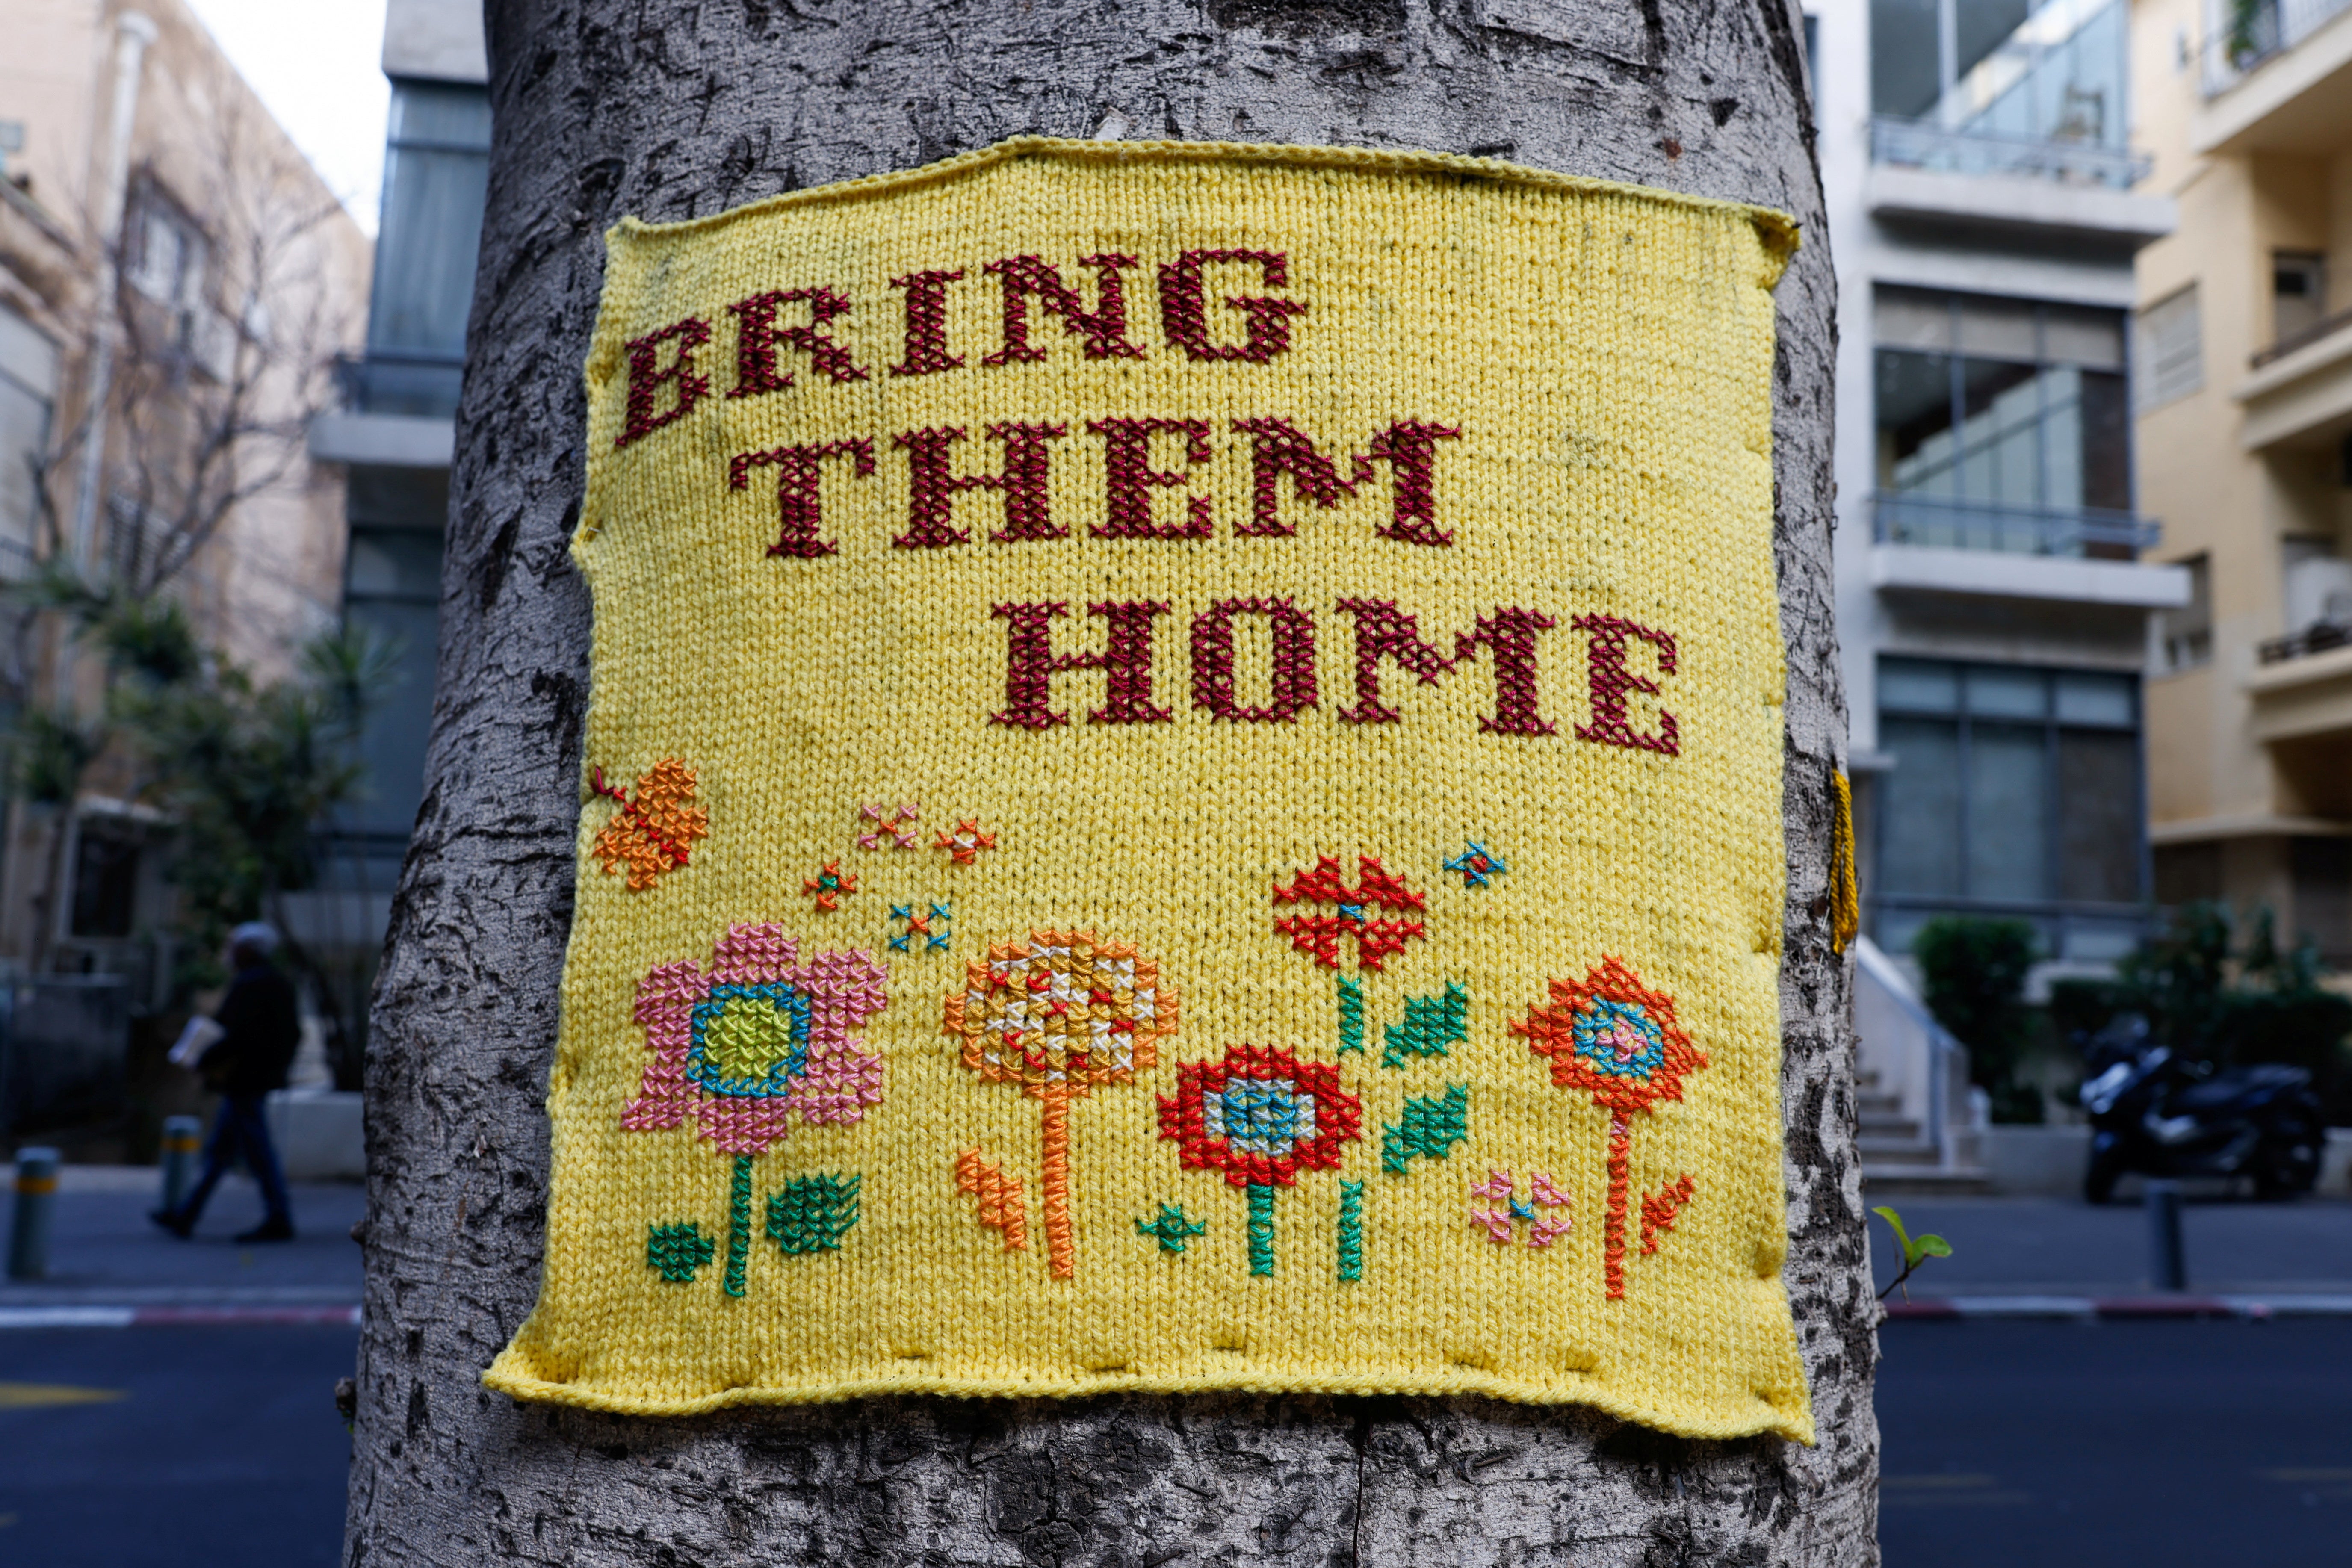 An embroidered message attached to a tree calls for the release of hostages kidnapped in the deadly 7 October attack, in Tel Aviv